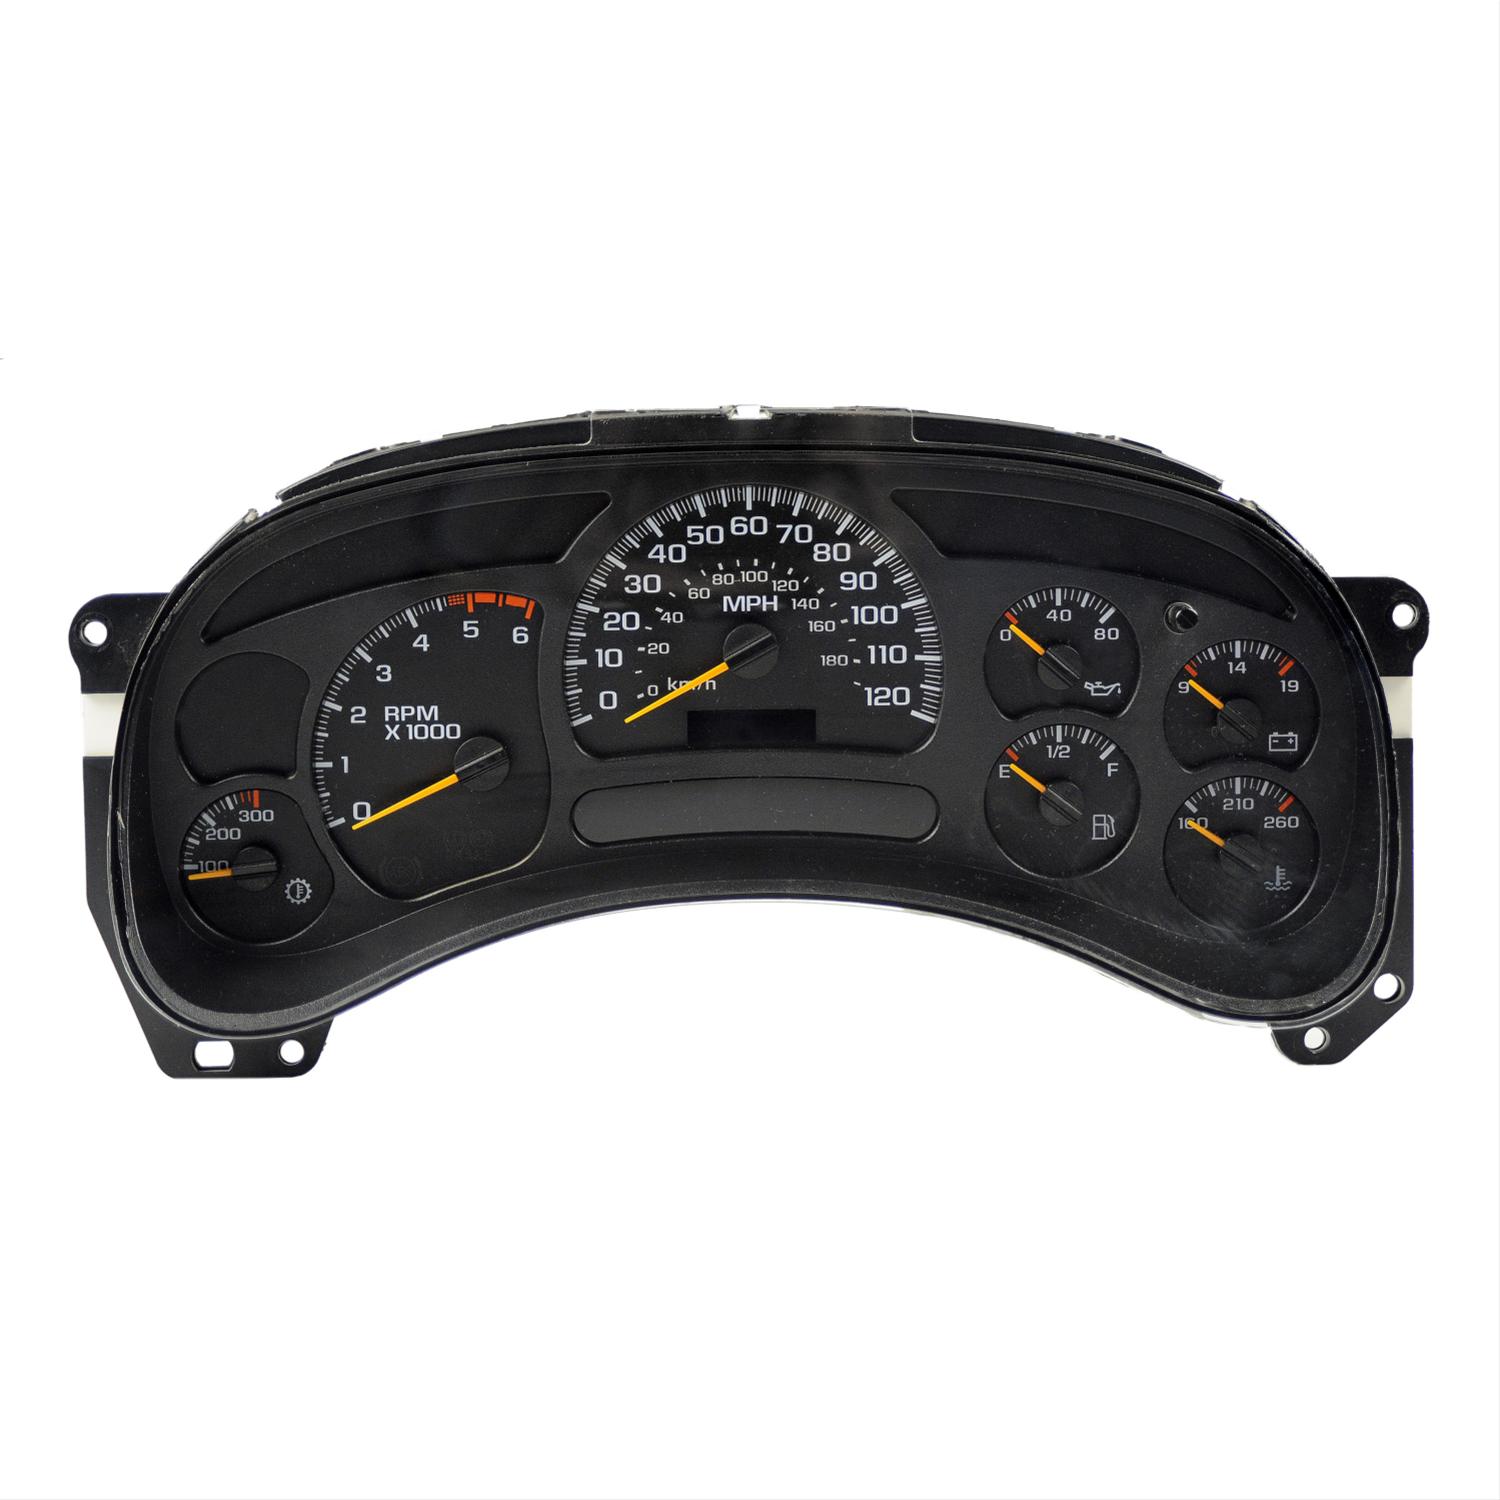 Buick instrument Cluster.